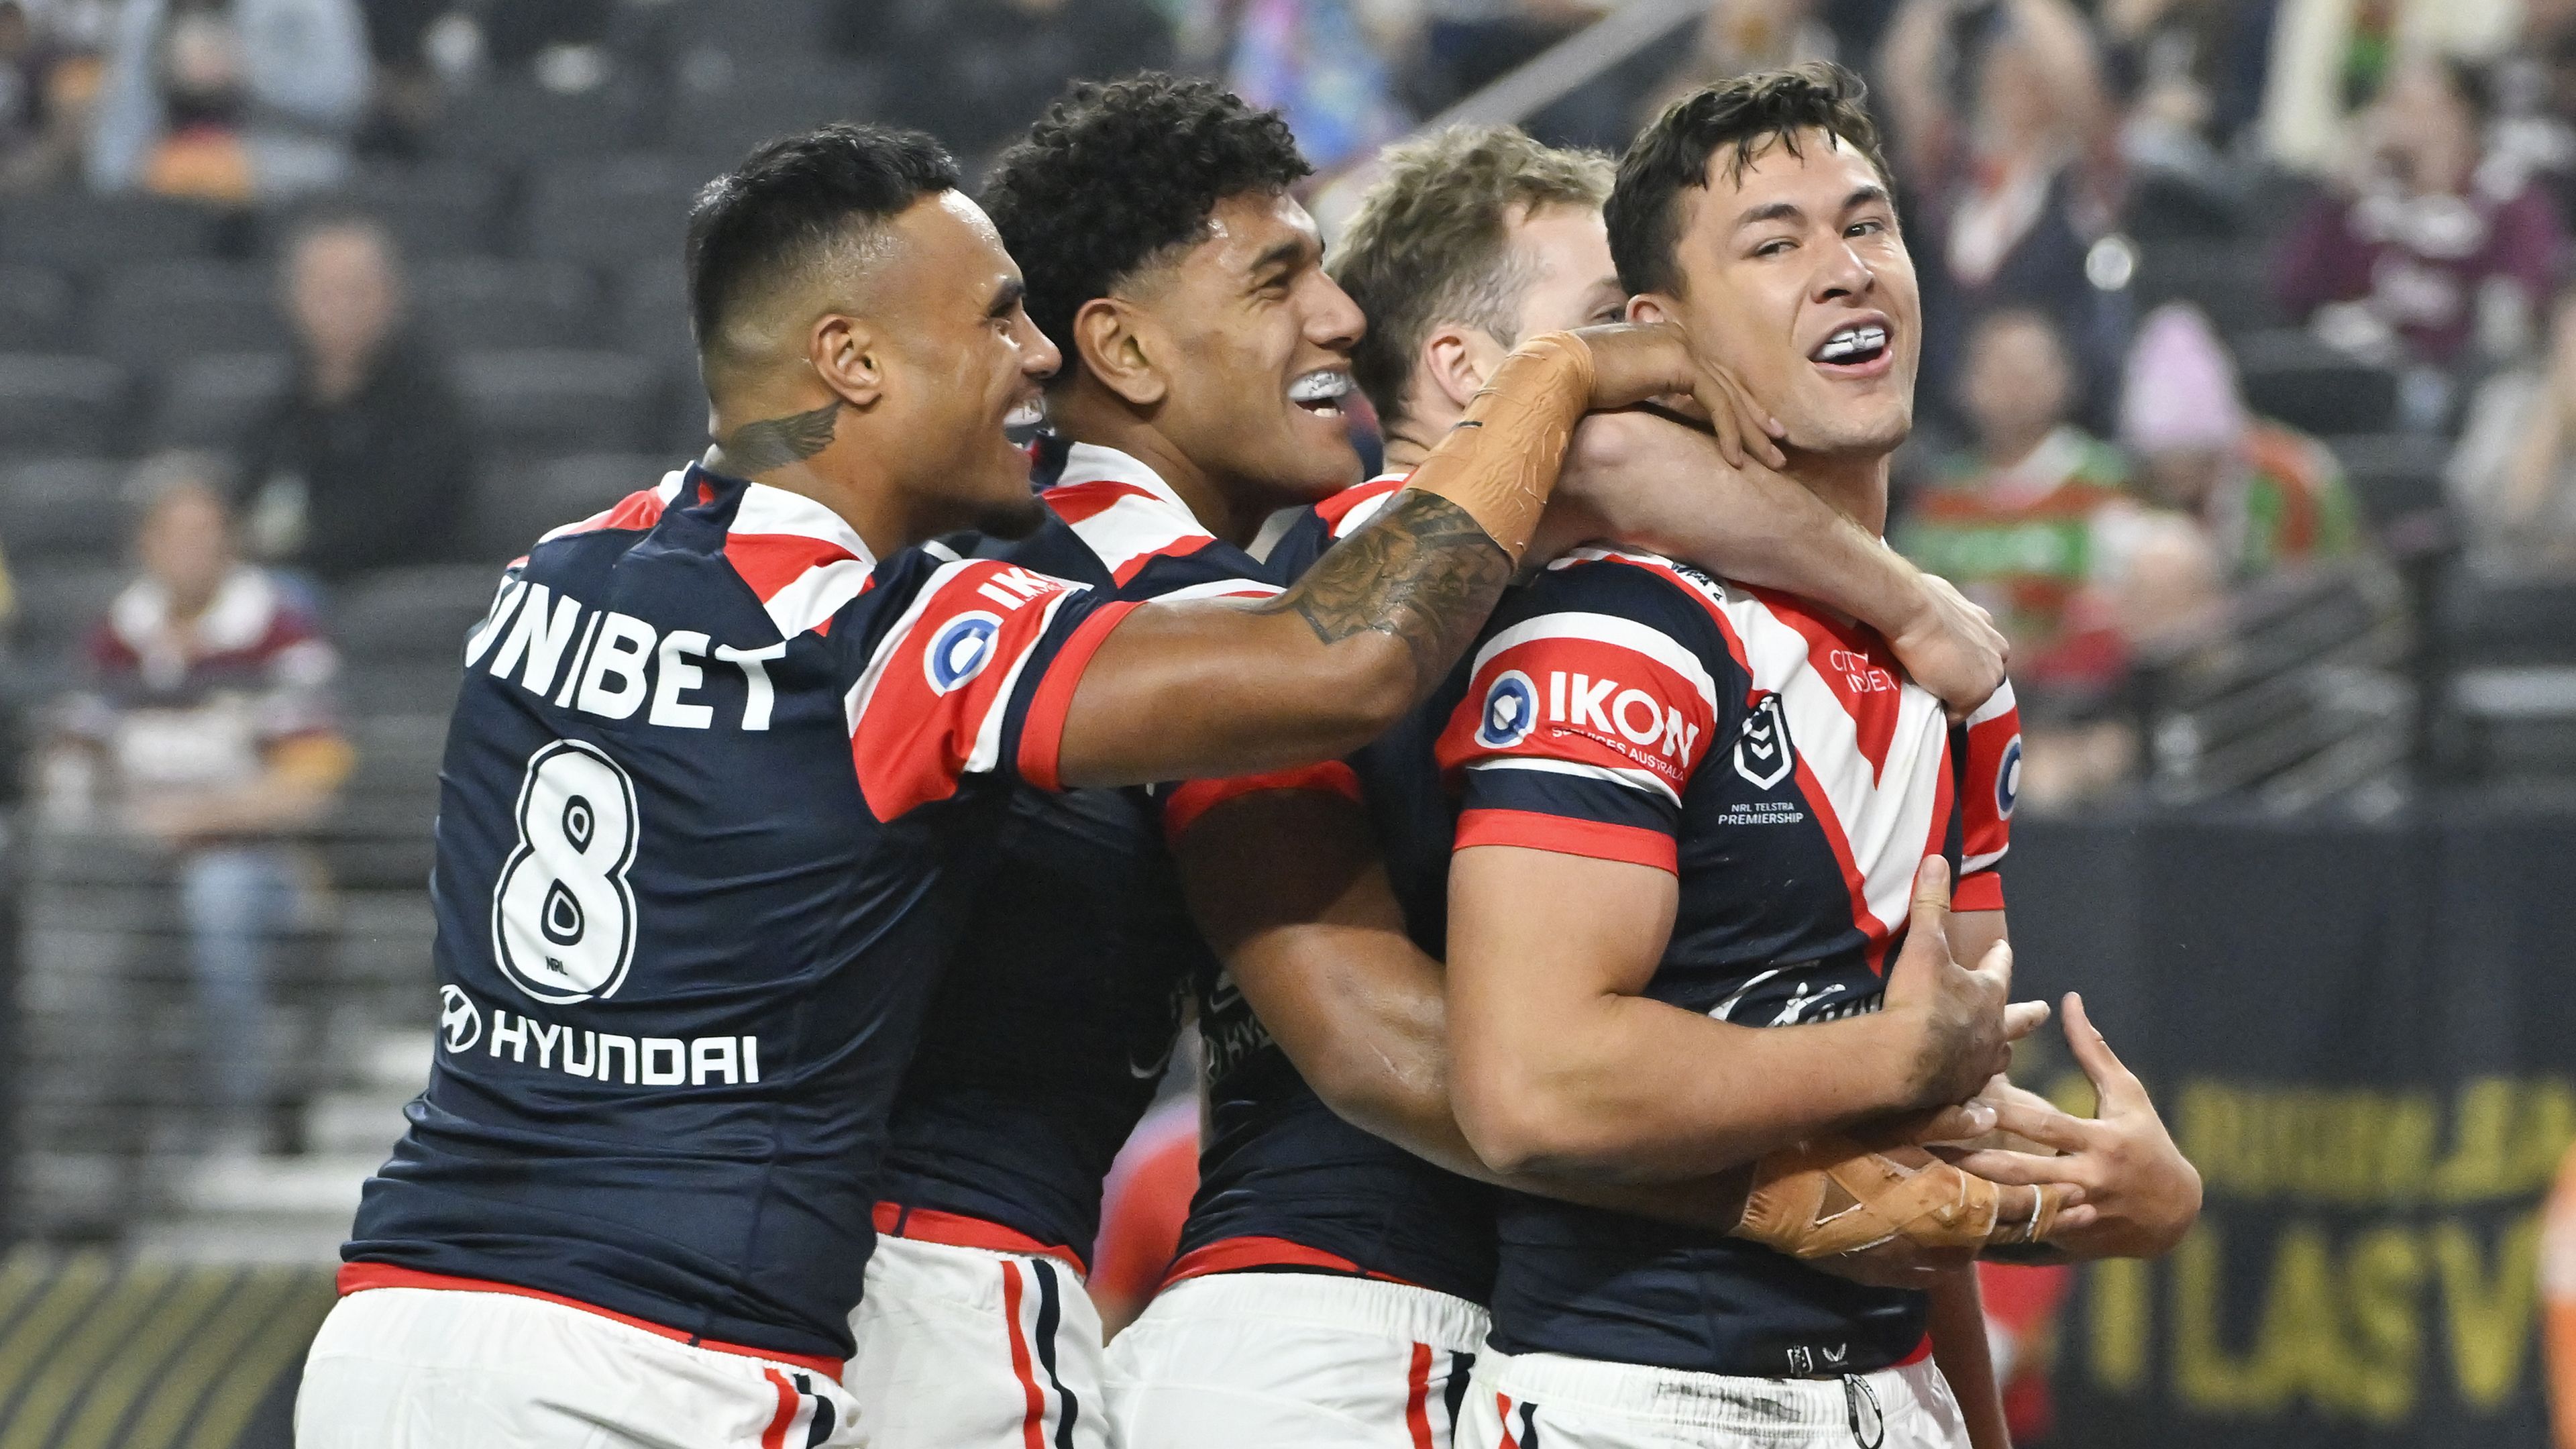 'Never seen before': Joseph Manu 'miracle' leads Roosters to upset Las Vegas victory